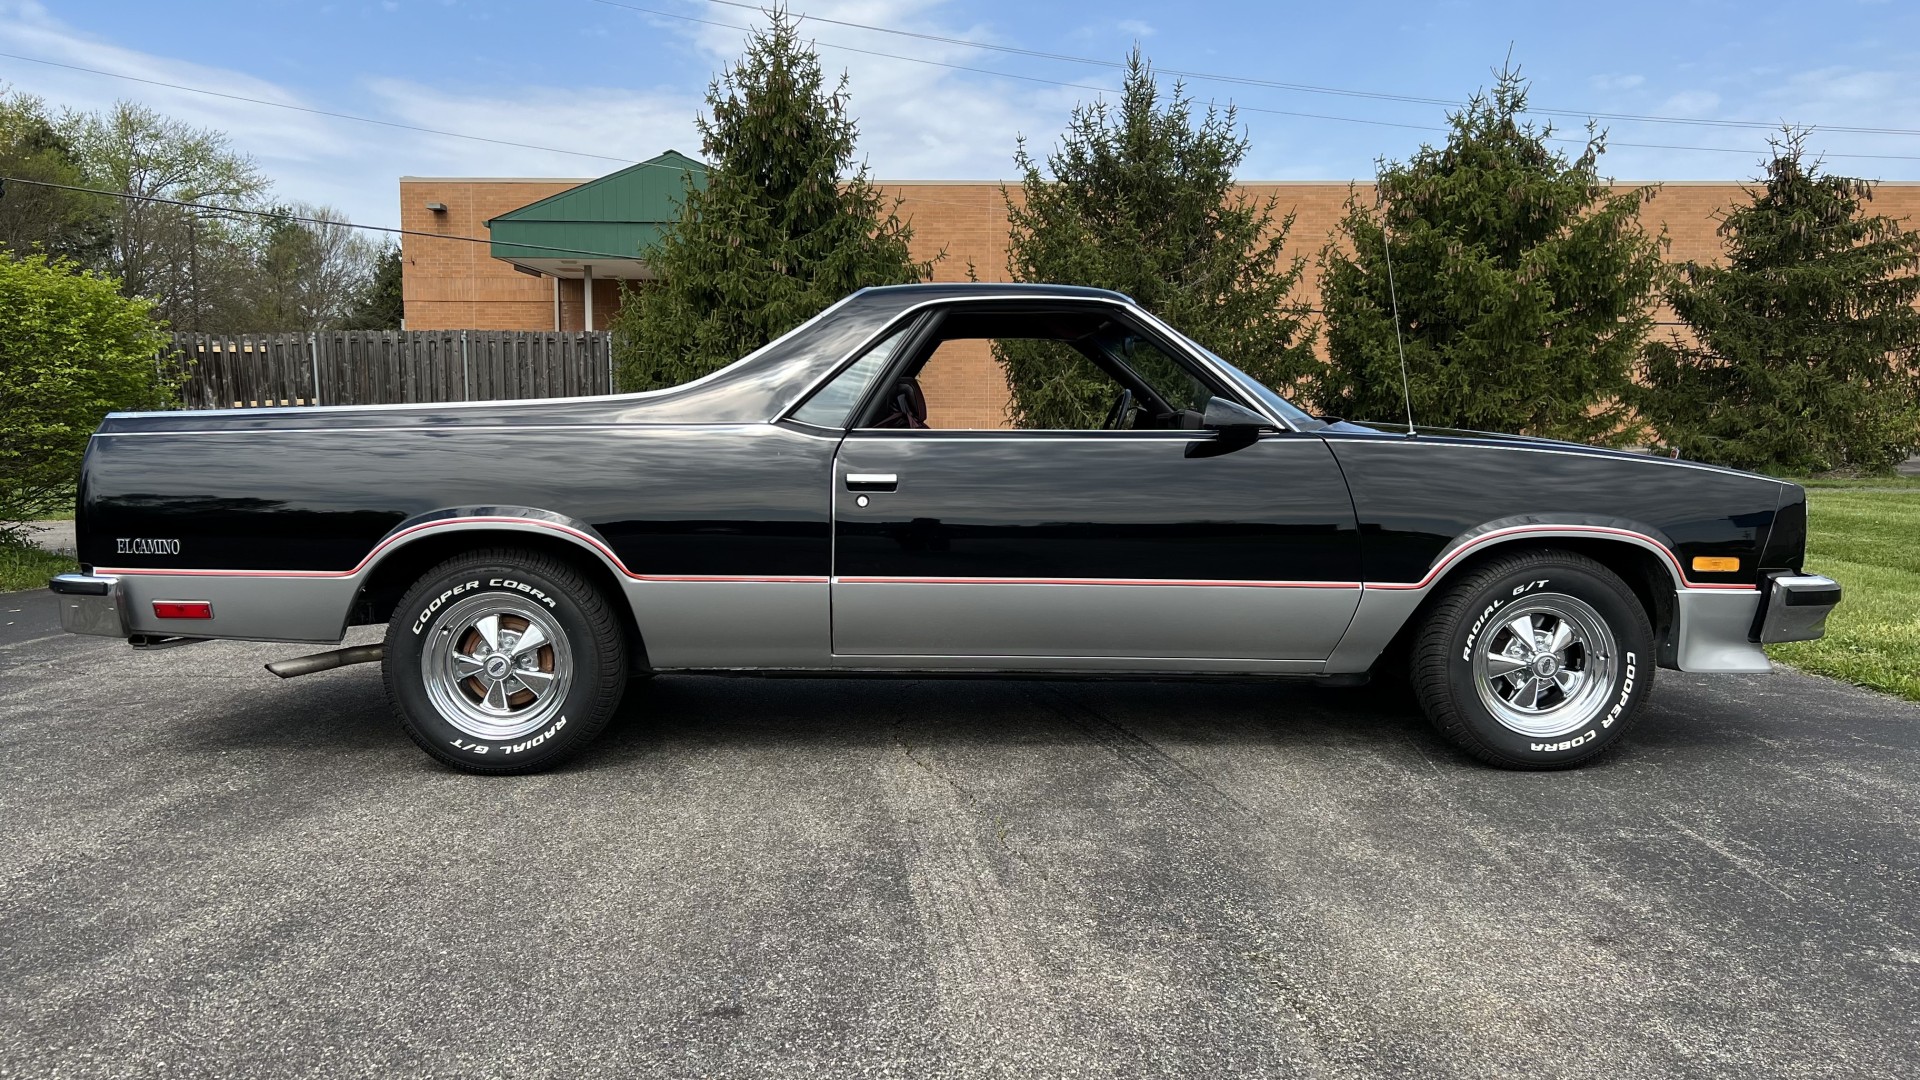 1987 Chevy El Camino, 2 owners, 305 V8, 84K Miles, SOLD!